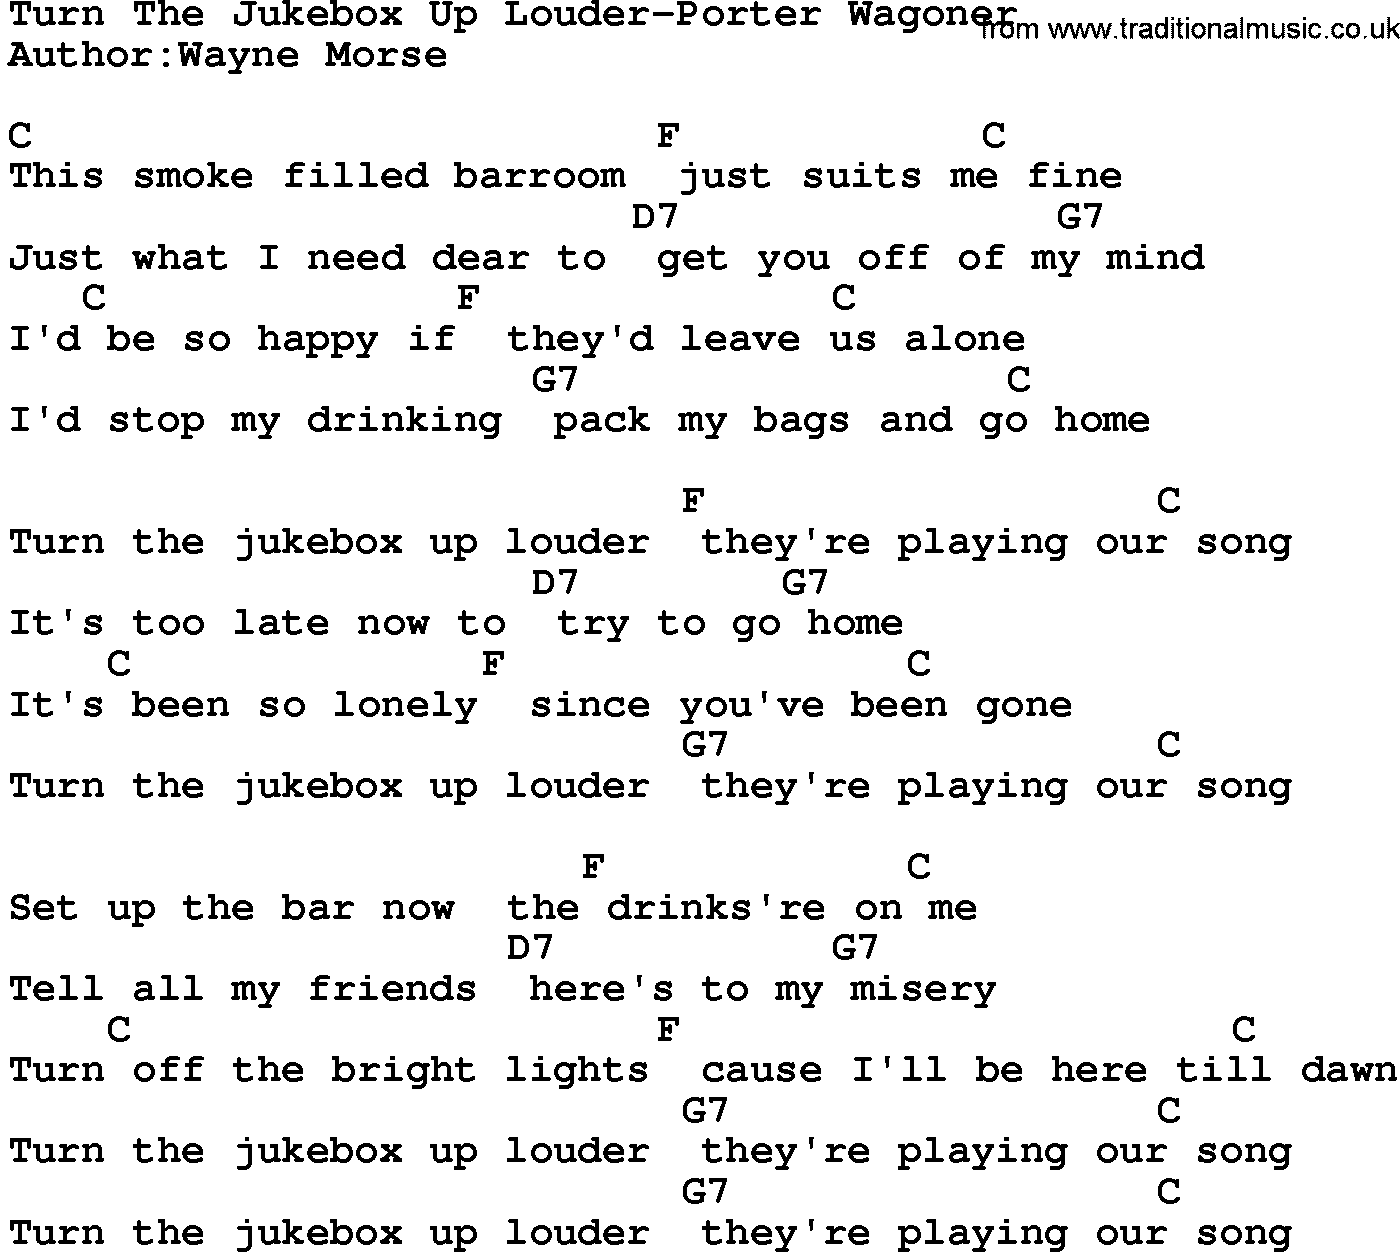 Country music song: Turn The Jukebox Up Louder-Porter Wagoner  lyrics and chords